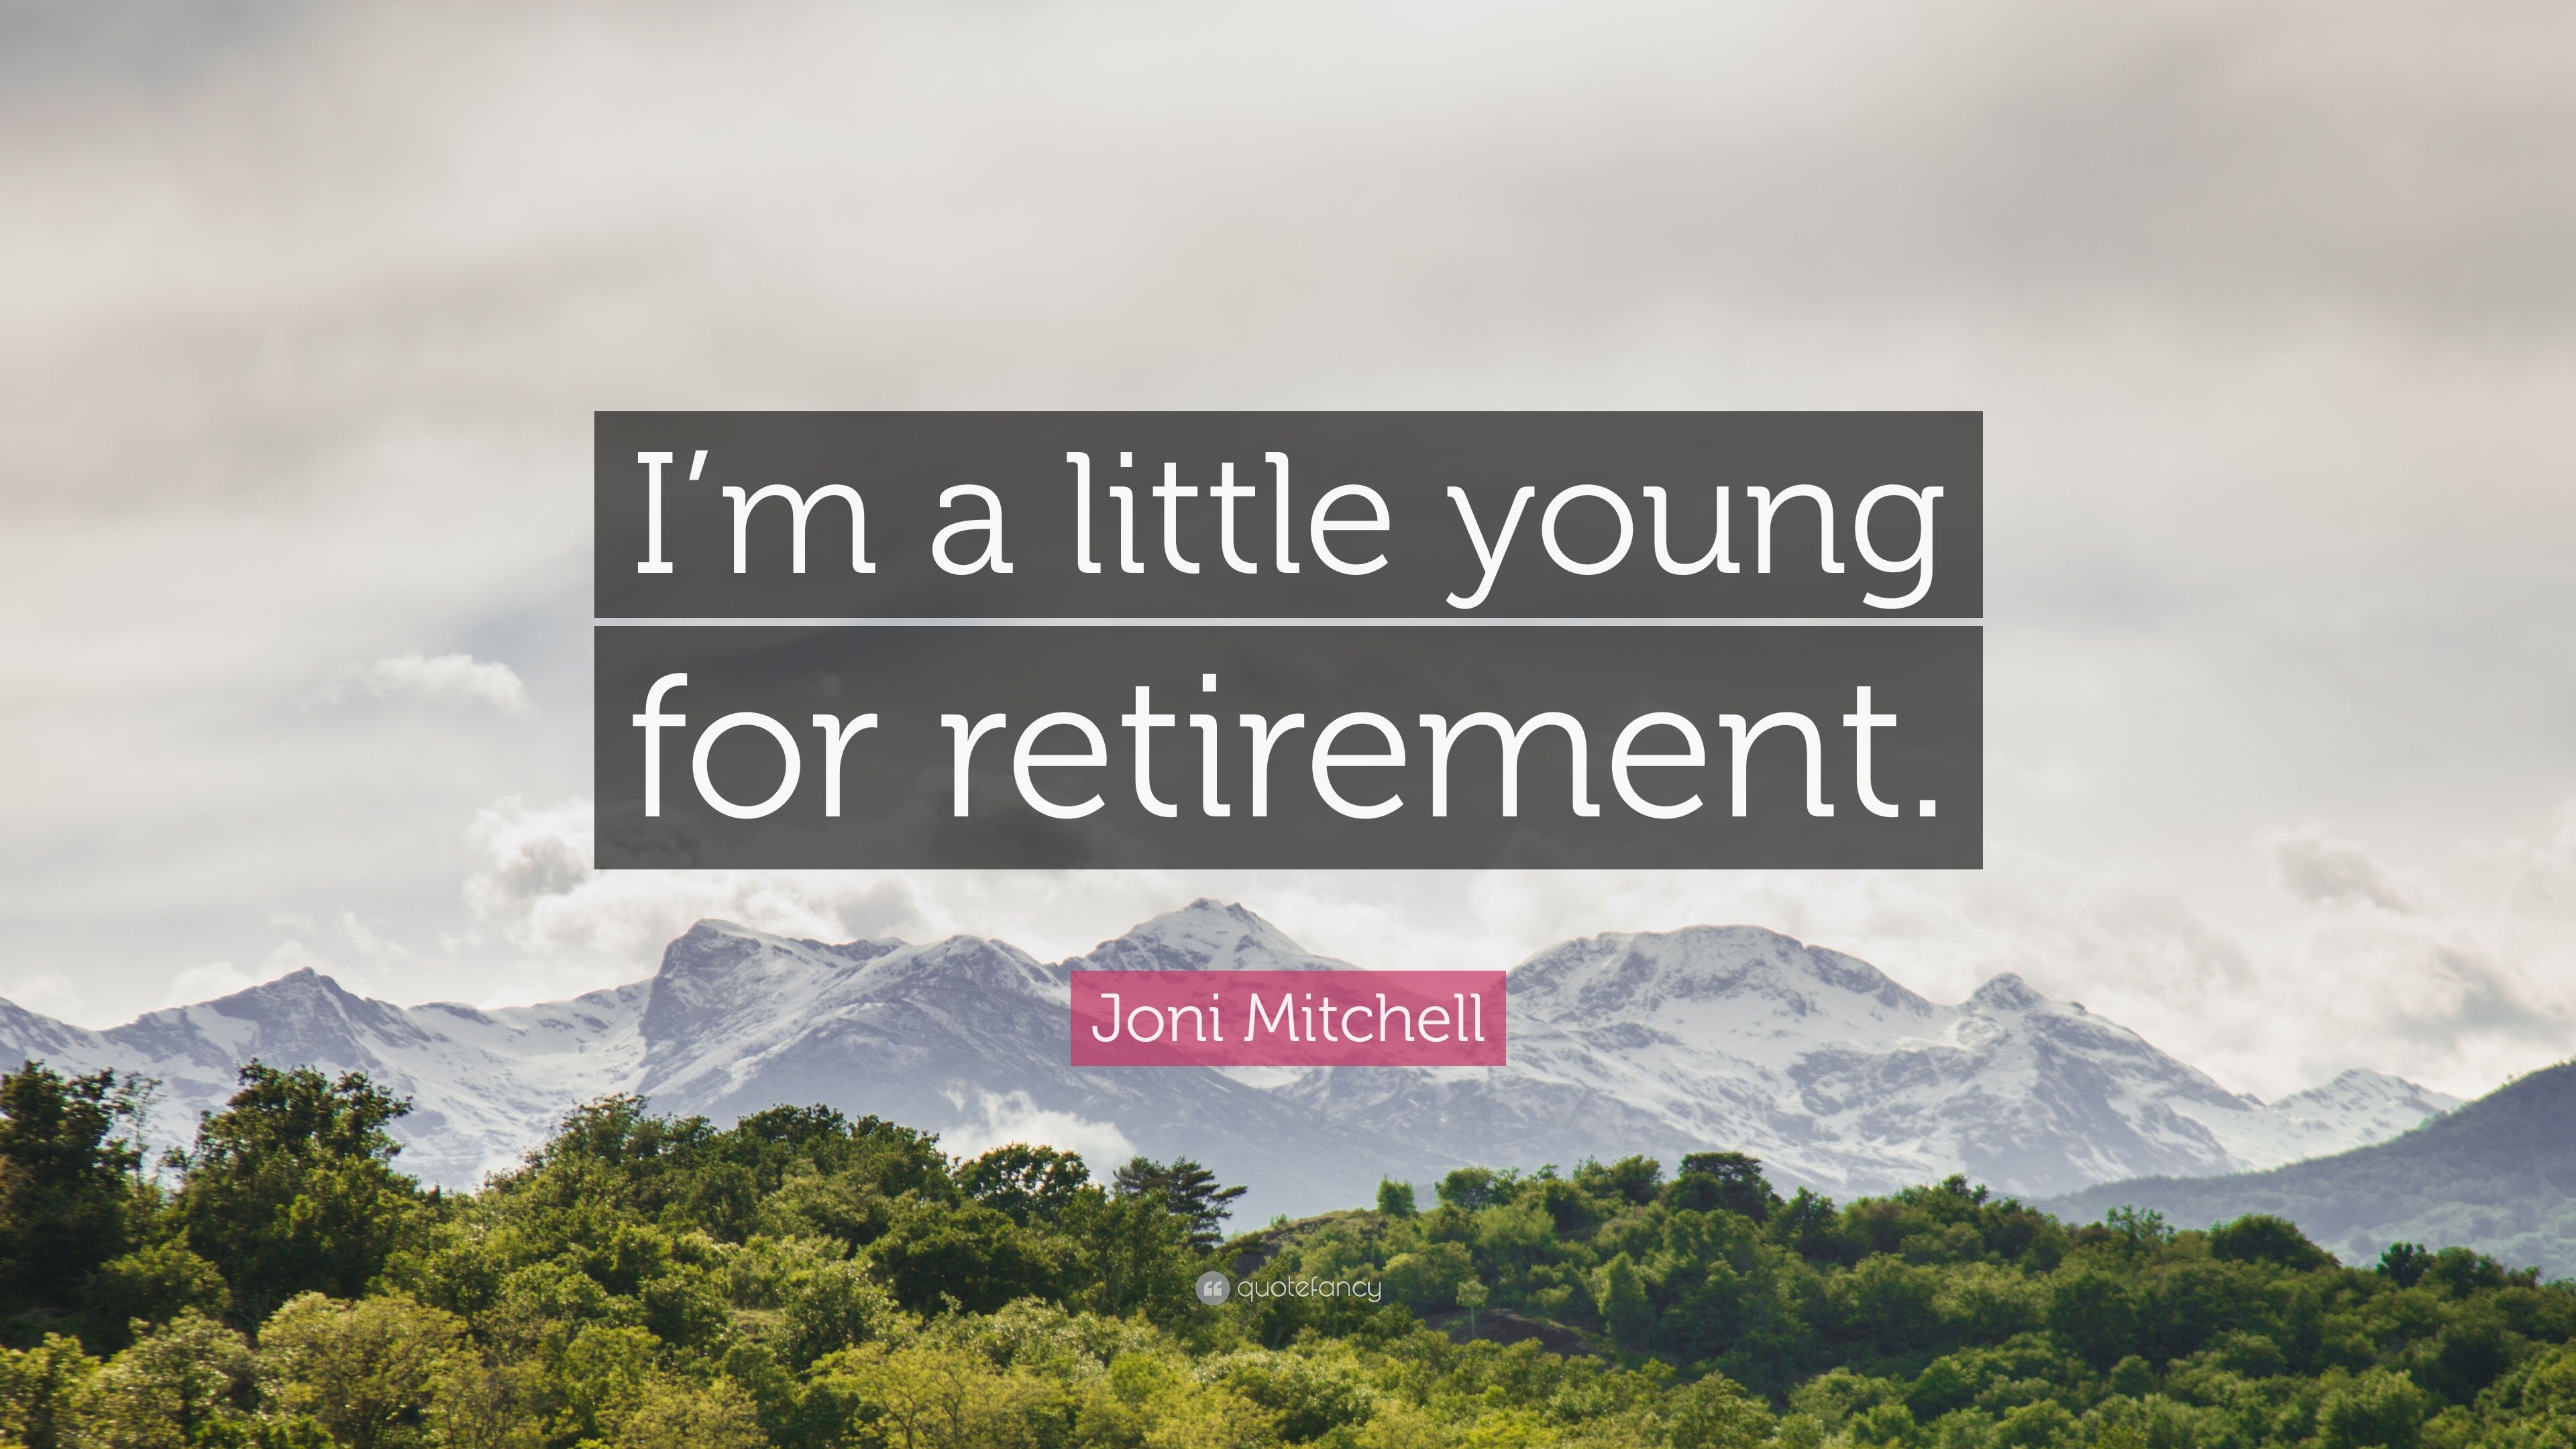 Joni Mitchell Quote: “I'm a little young for retirement.” 9